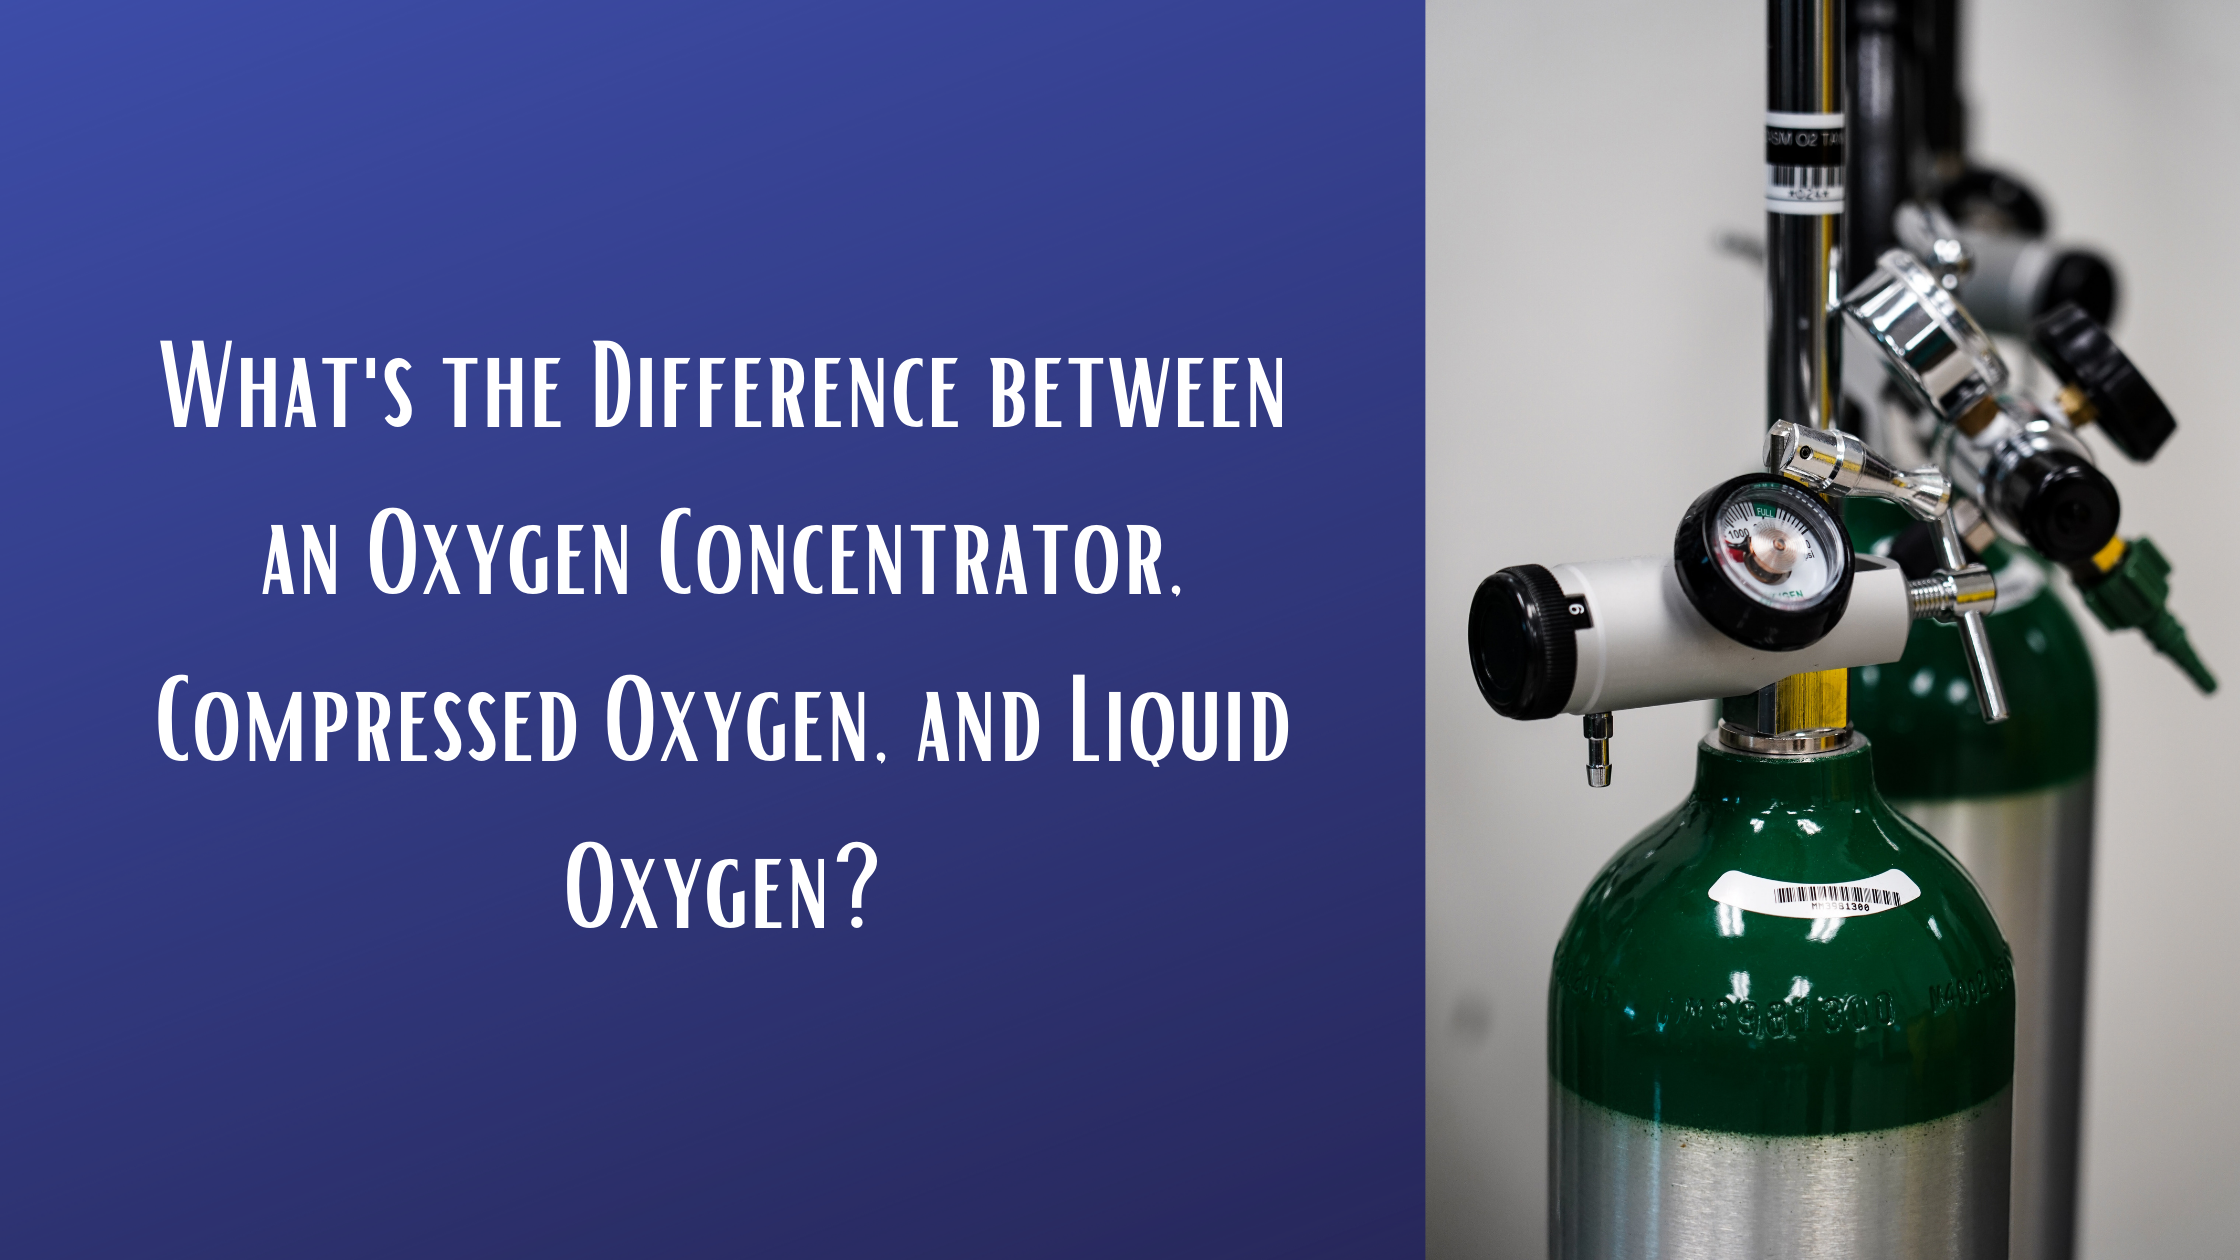 Whats the Difference between an Oxygen Concentrator, Compressed Oxygen, and Liquid Oxygen